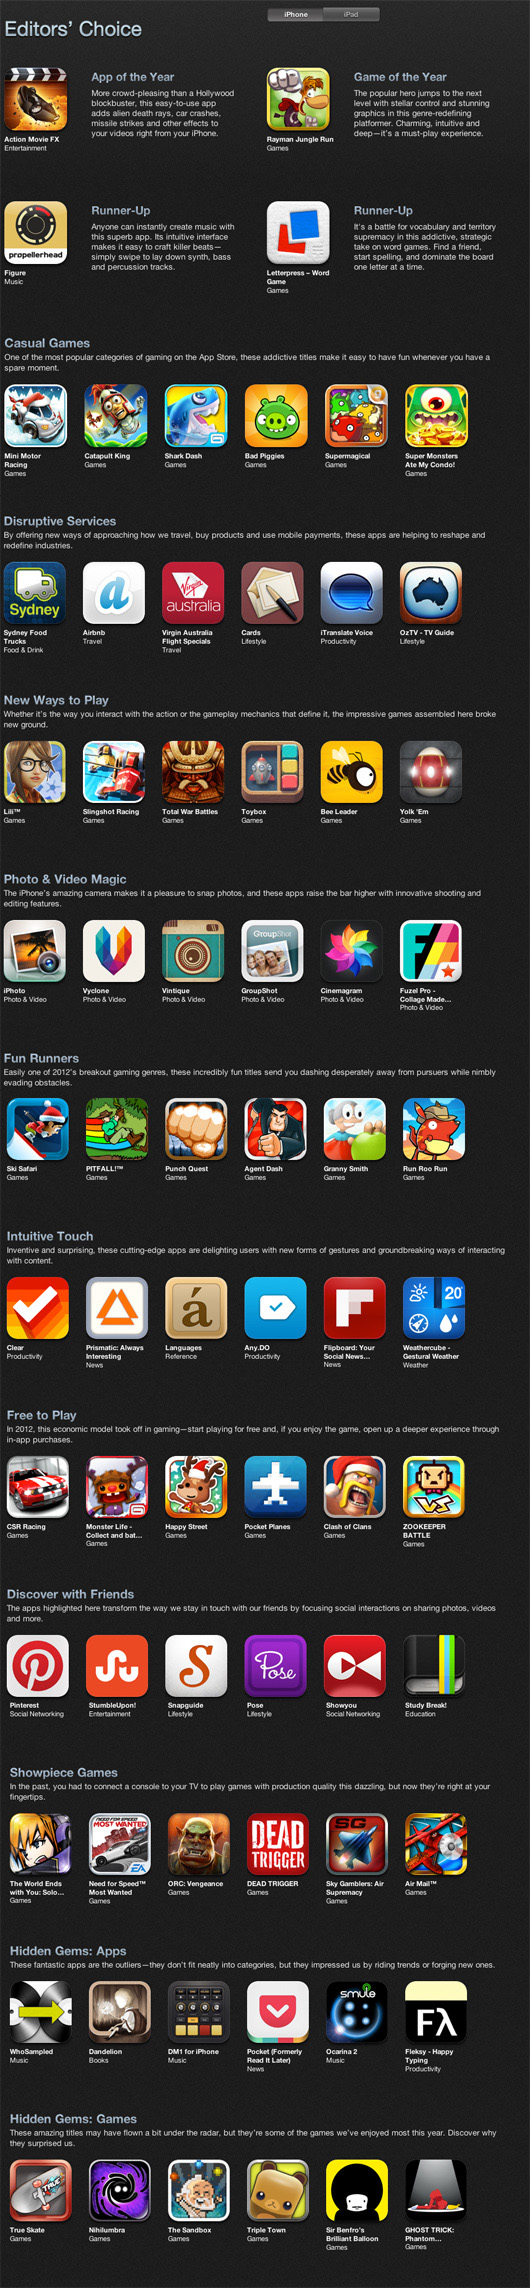 Aussie developers feature in Apple's 'Best of 2012